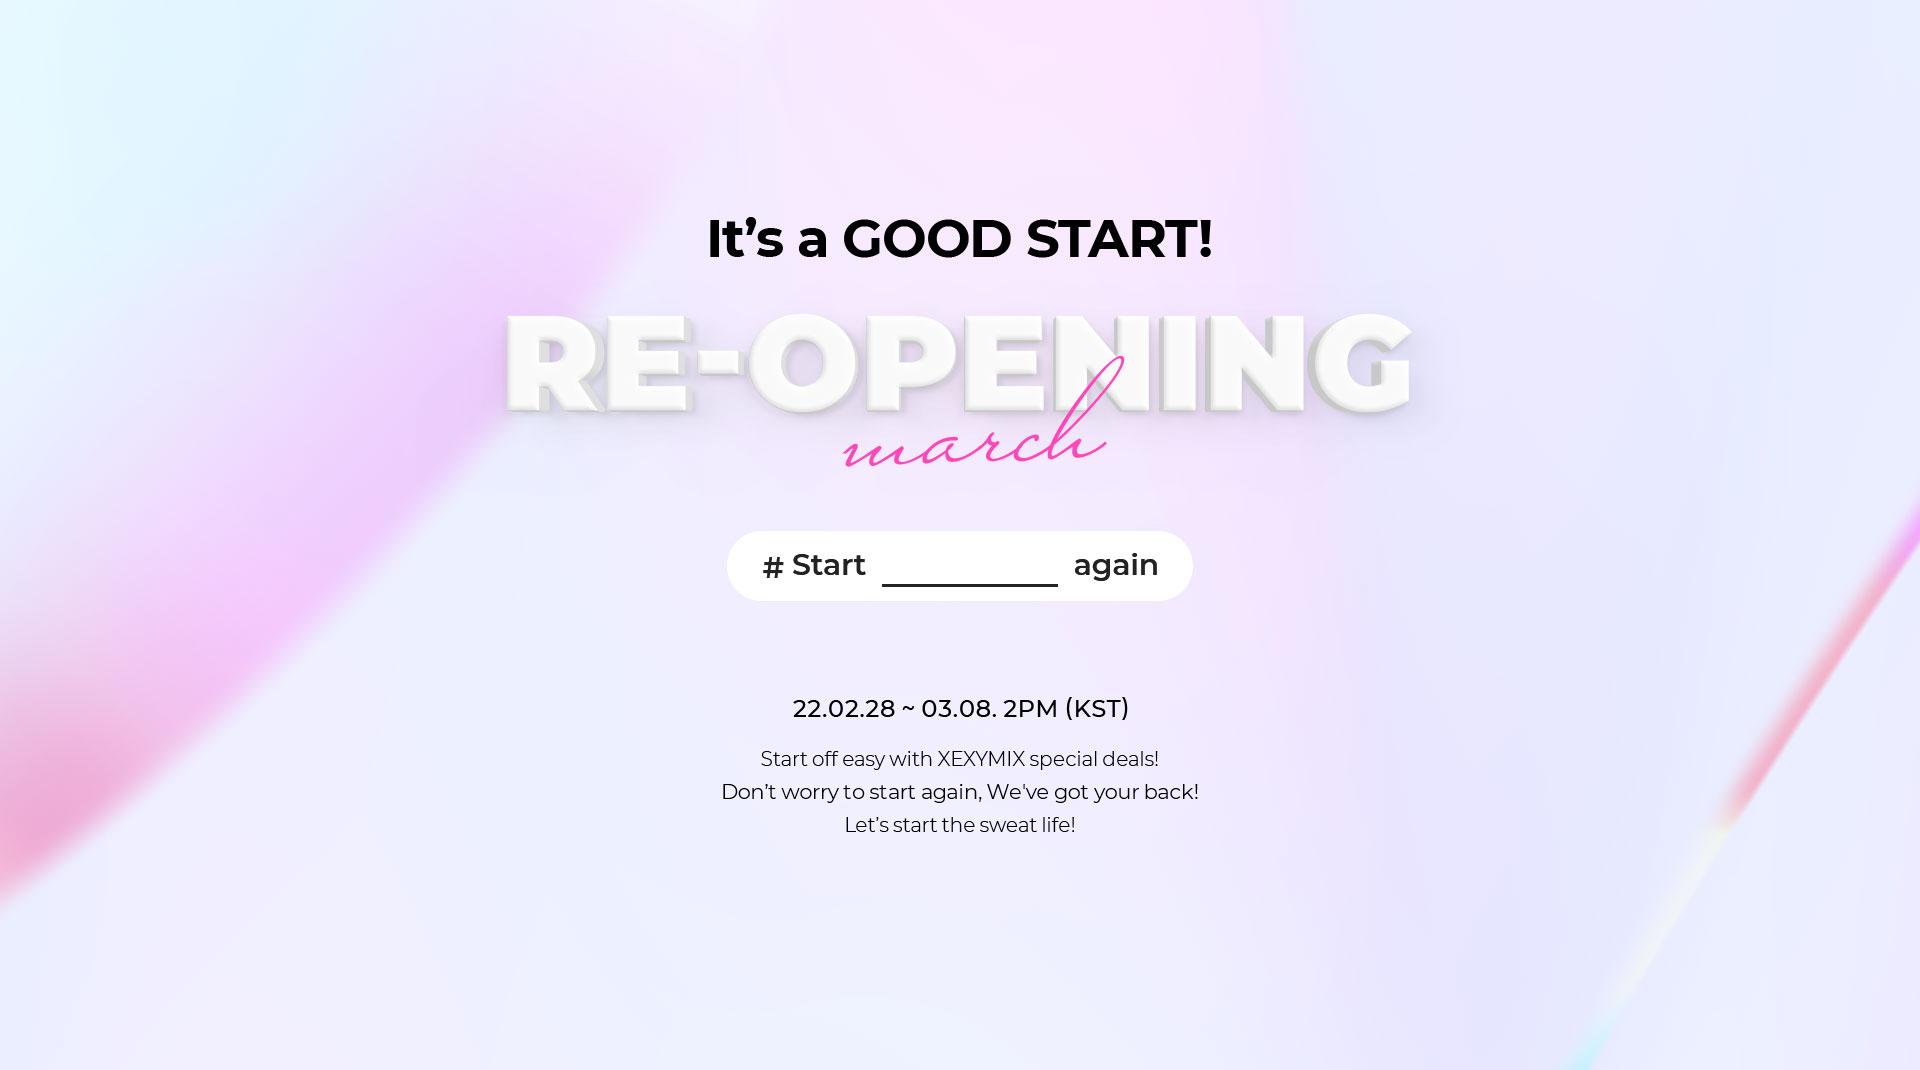 reopening event image